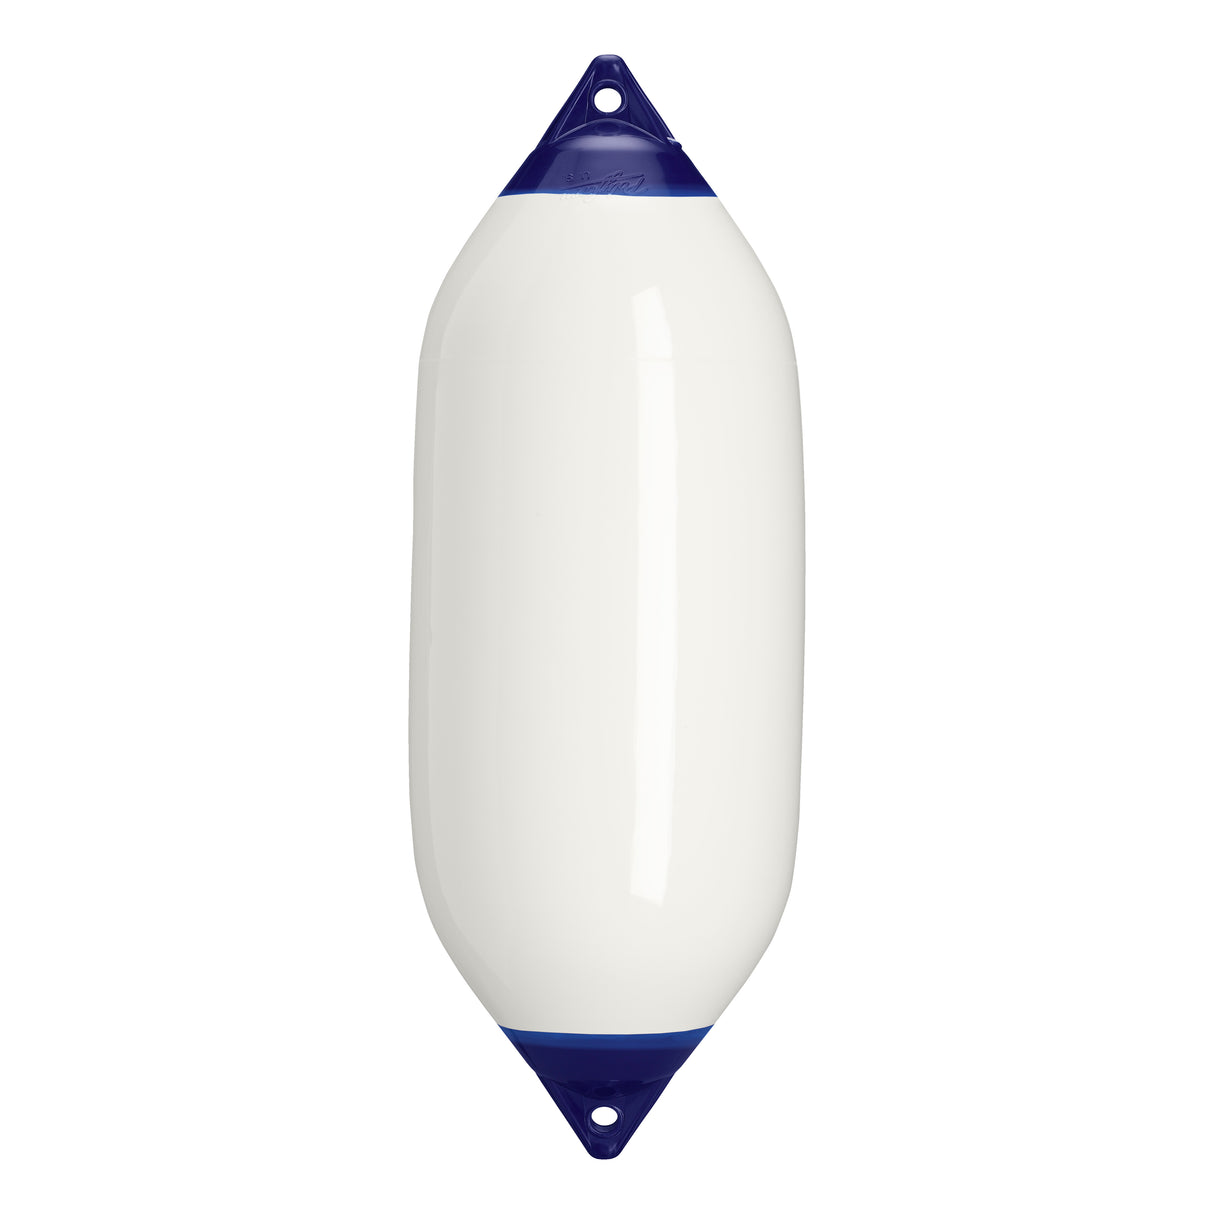 White boat fender with Navy-Top, Polyform F-7 